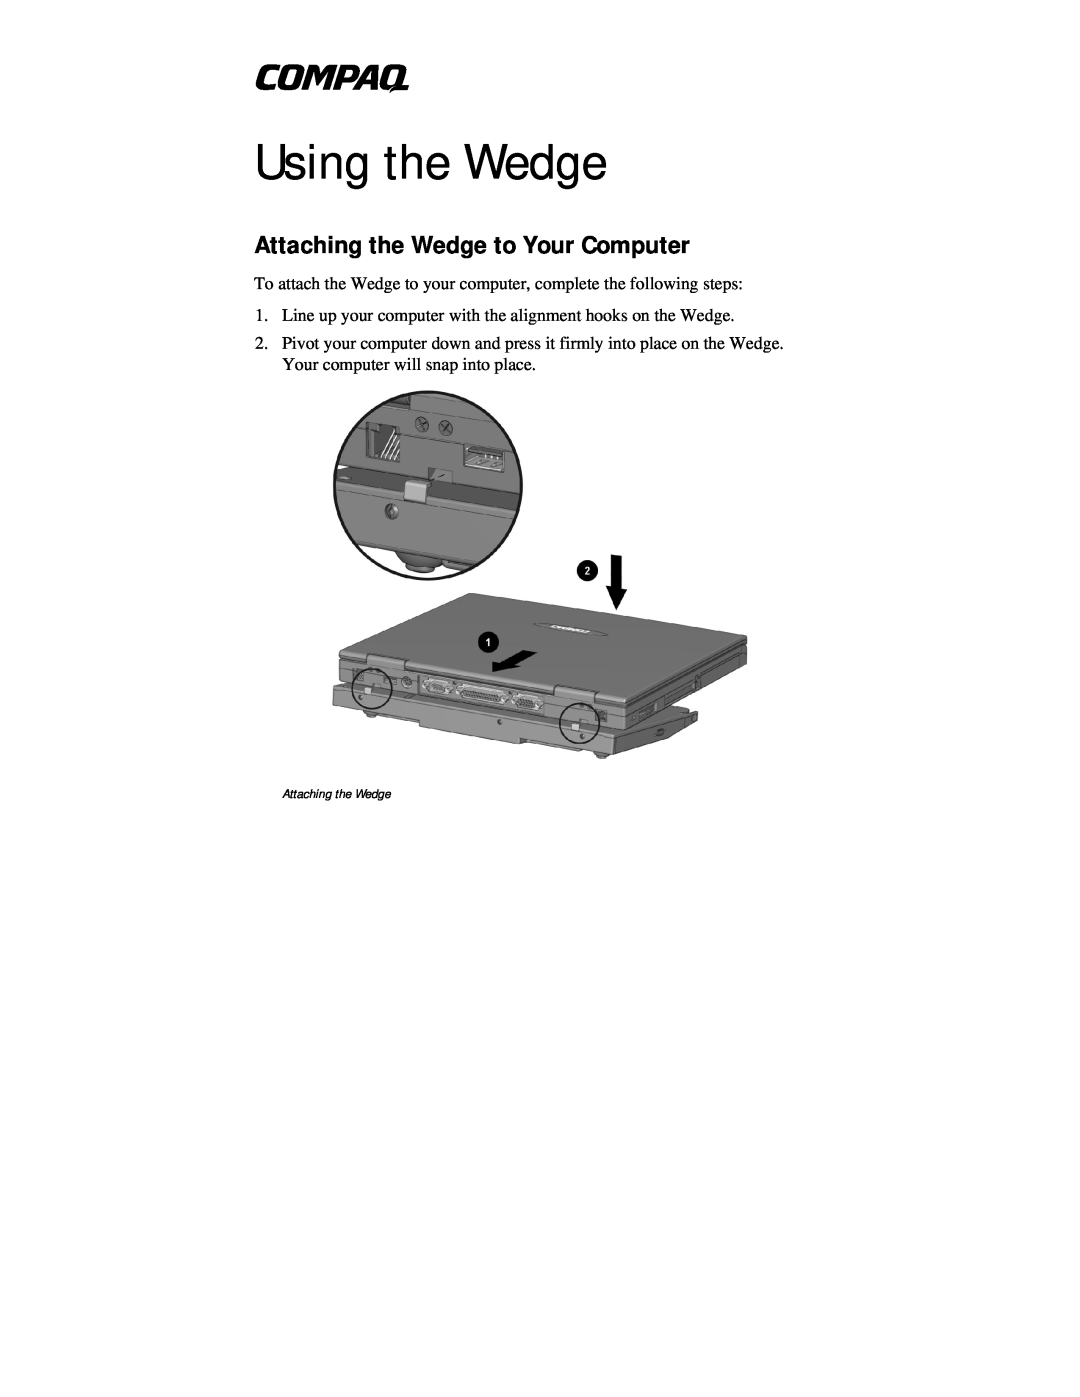 Compaq 400000 manual Attaching the Wedge to Your Computer, Using the Wedge 